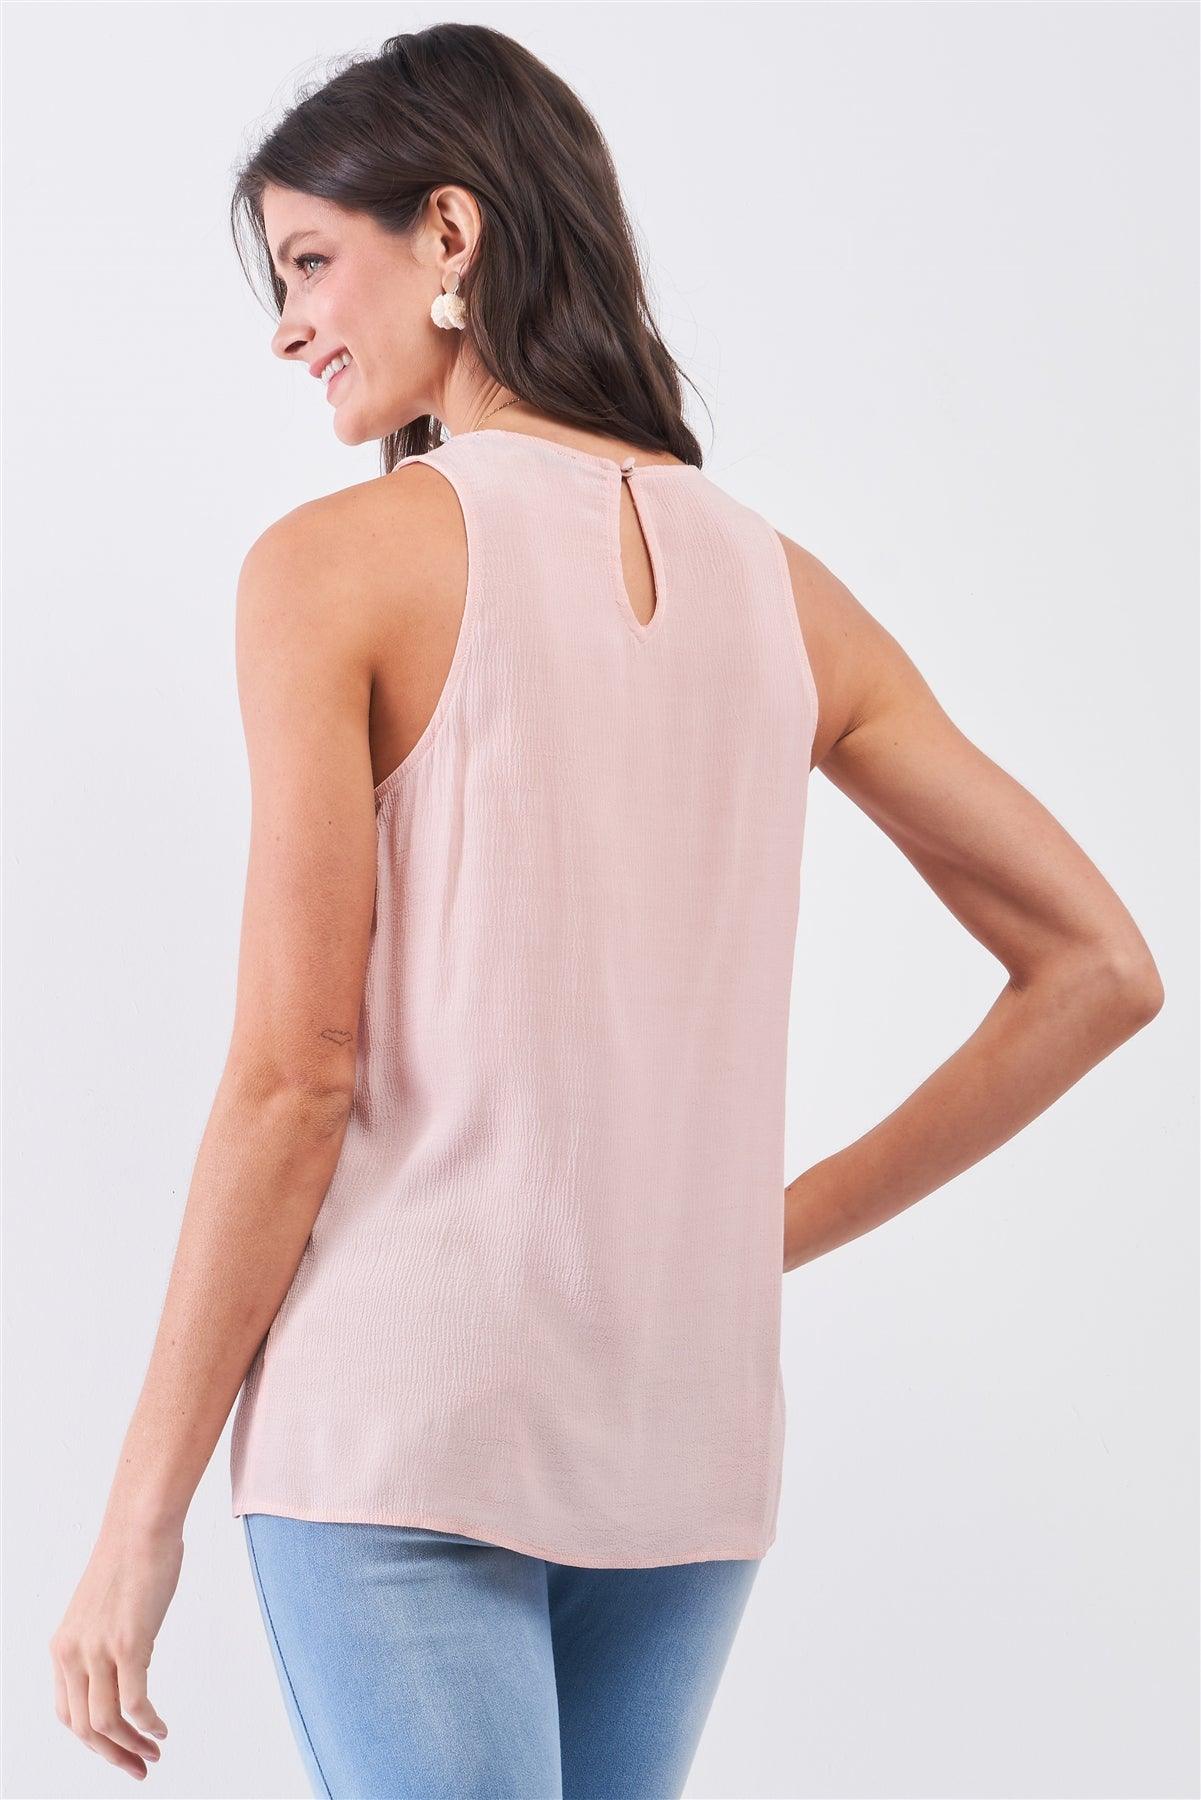 Blush Pink CrÍpe Fabric Sleeveless Buttoned Back Scoop Neckline Babydoll Top /1-3-1